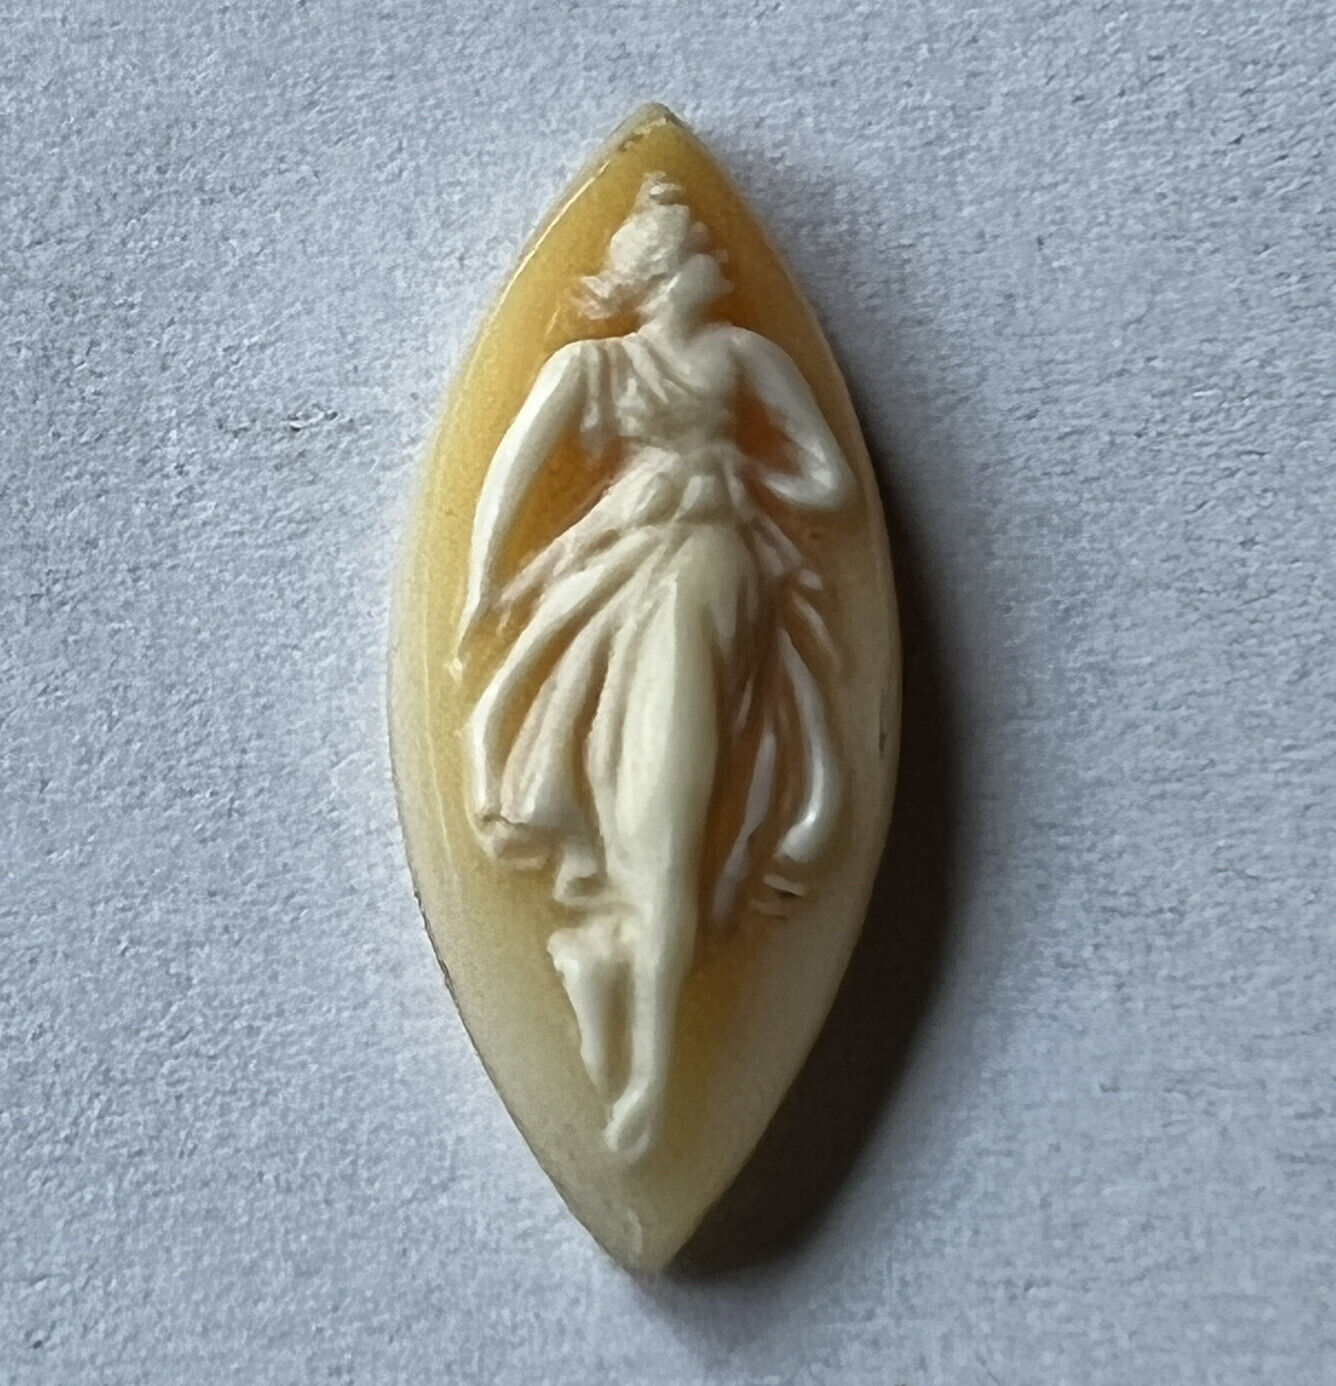 VERY INTERESTING SMALL OVAL WITH RAISED IMAGE OF BALLERINA WOMAN DANCING